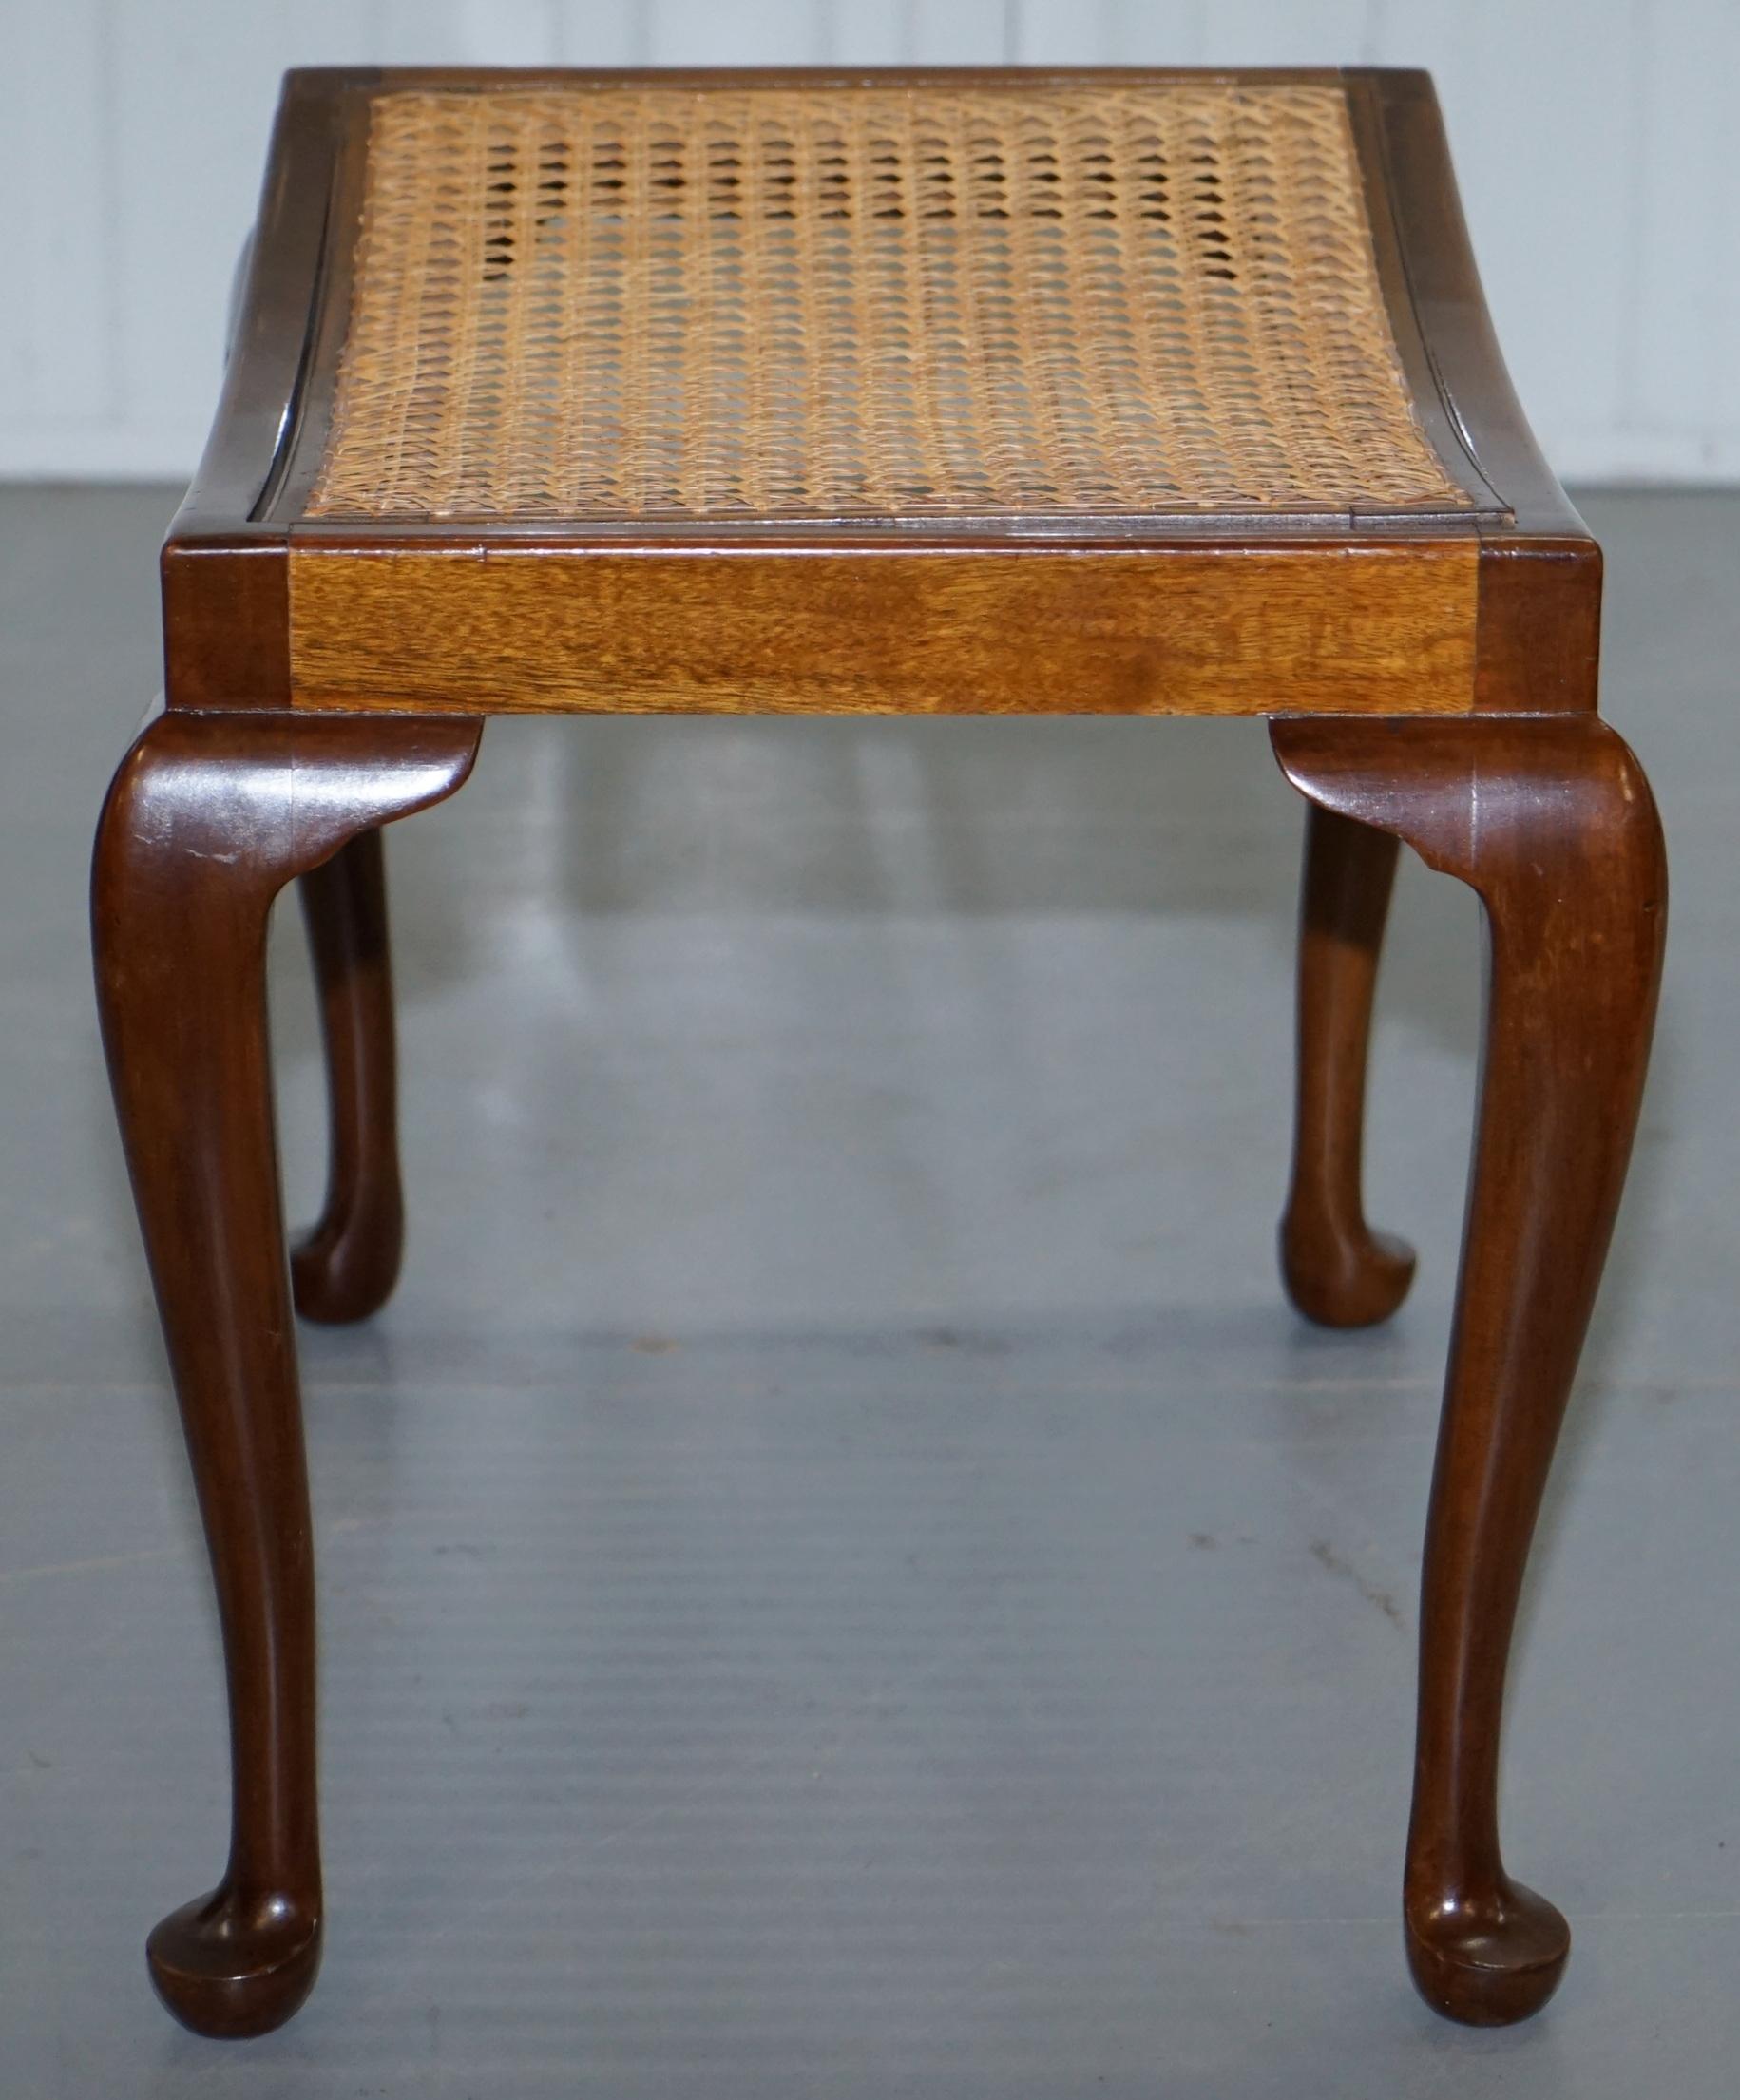 Lovely Vintage circa 1940s Rattan Berger Bench Stool Seat with Cabriolet Legs 6